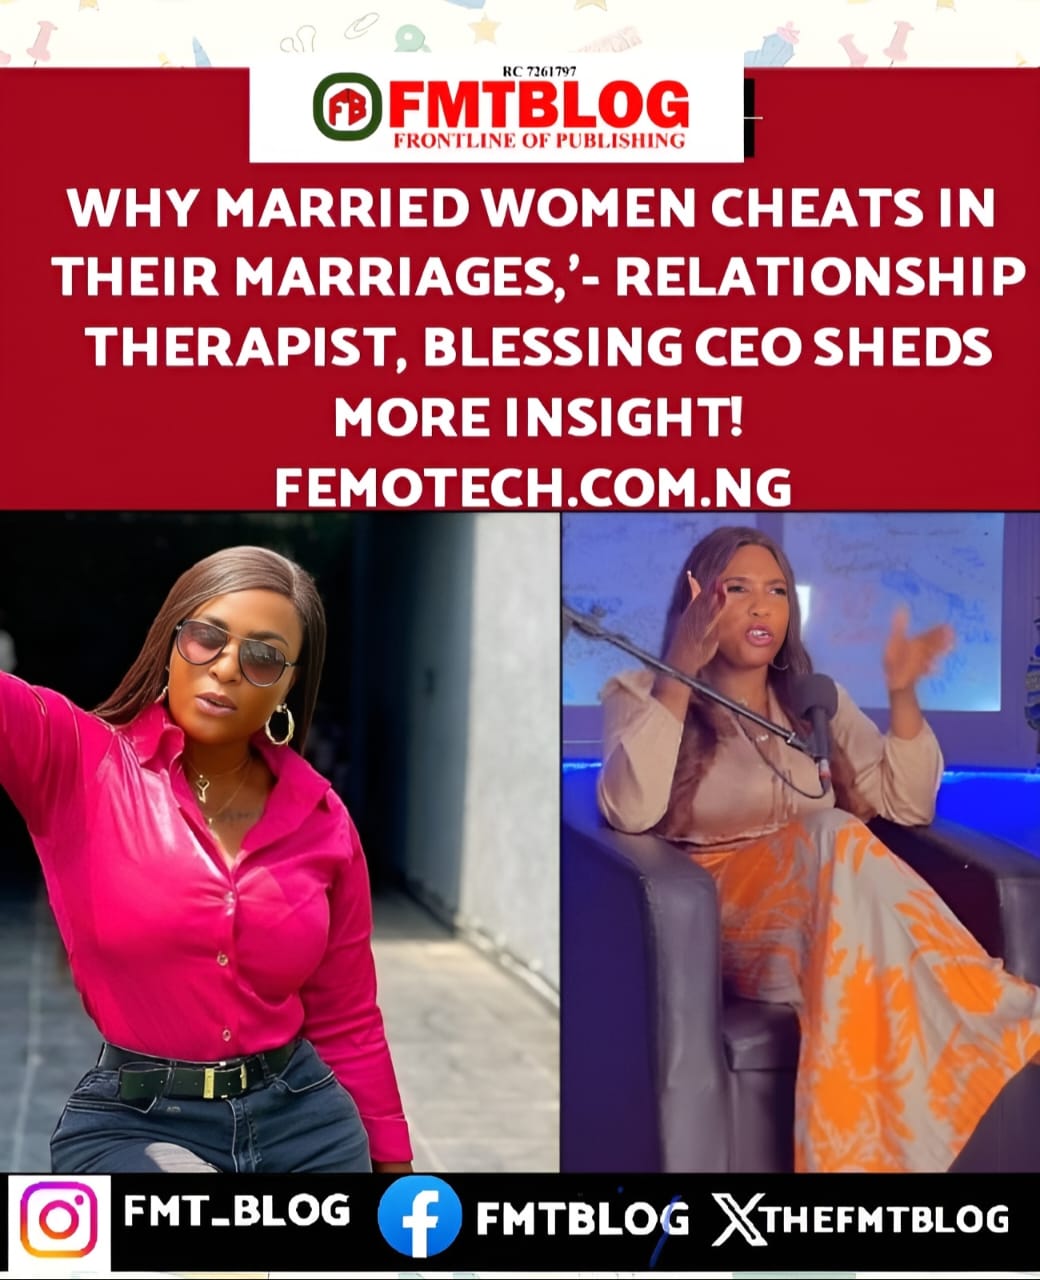 Why Married Women Cheats In Their Marriages -Relationship Therapist Blessing CEO Sheds More Insight!